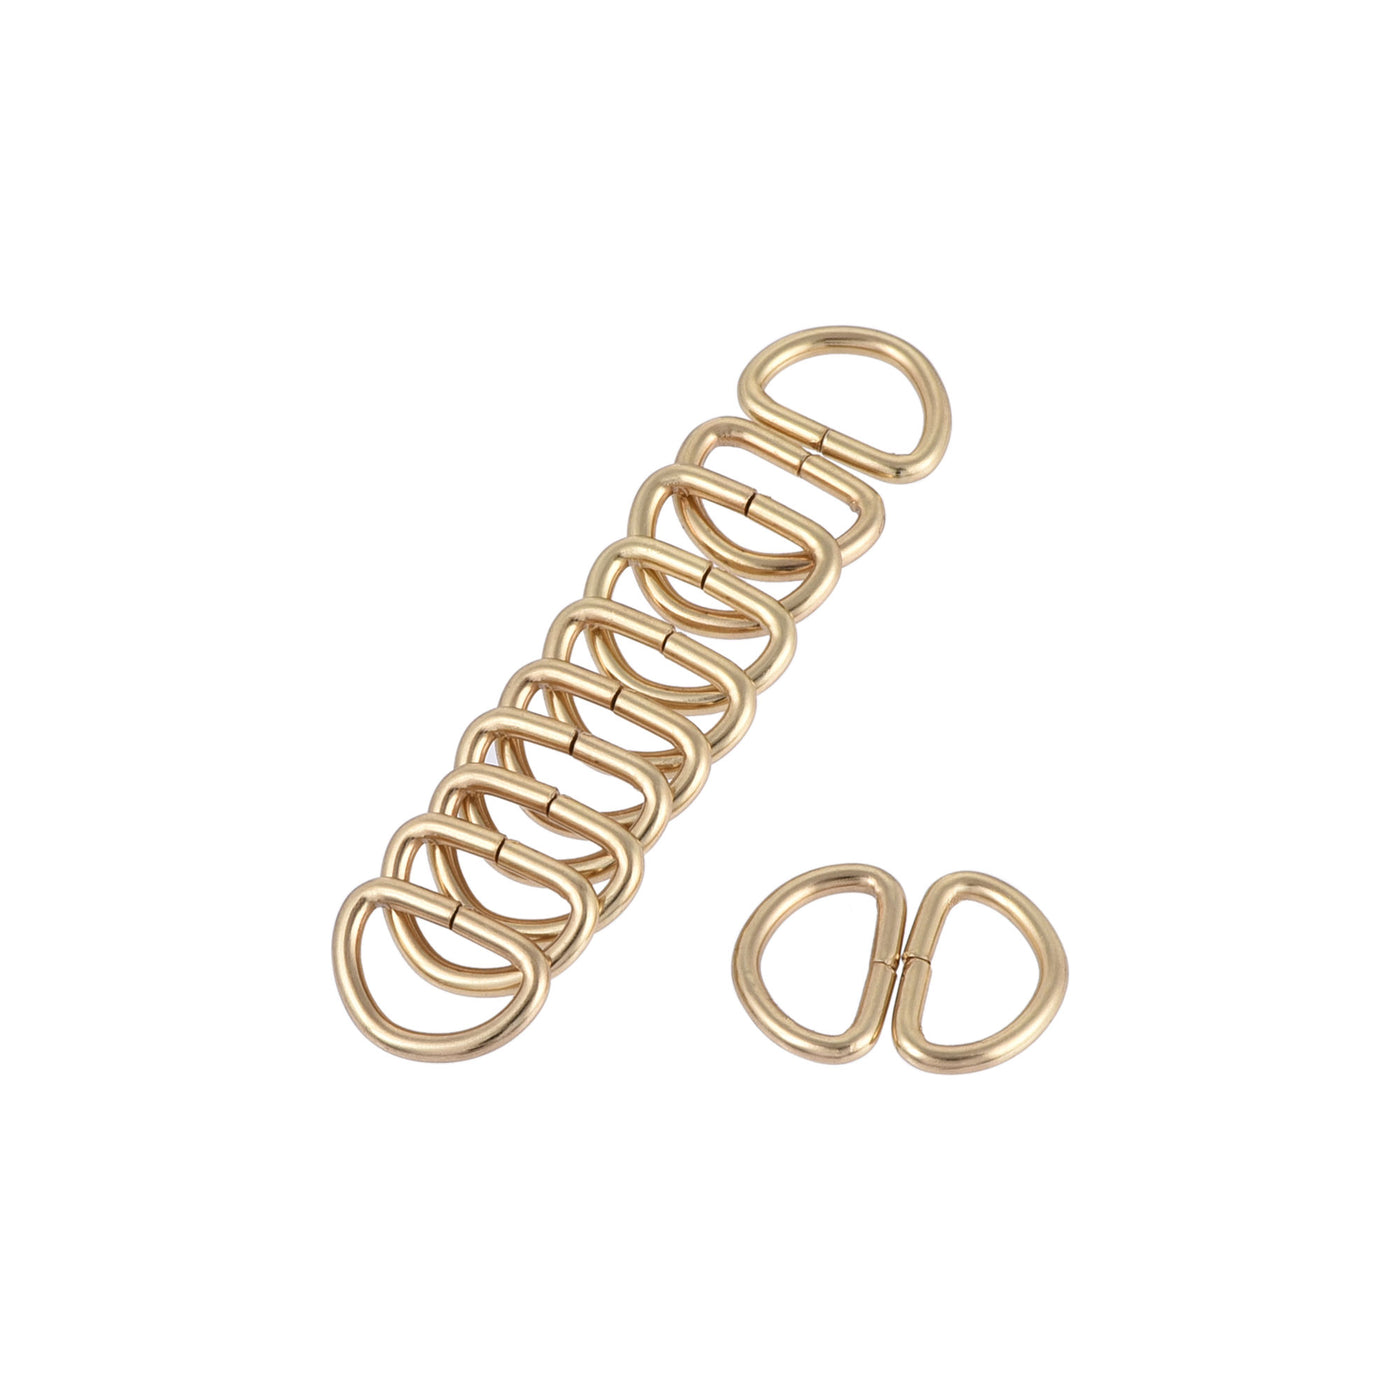 uxcell Uxcell Metal D Ring 0.39"(10mm) D-Rings Buckle for Hardware Bags Belts Craft DIY Accessories Gold Tone 50pcs